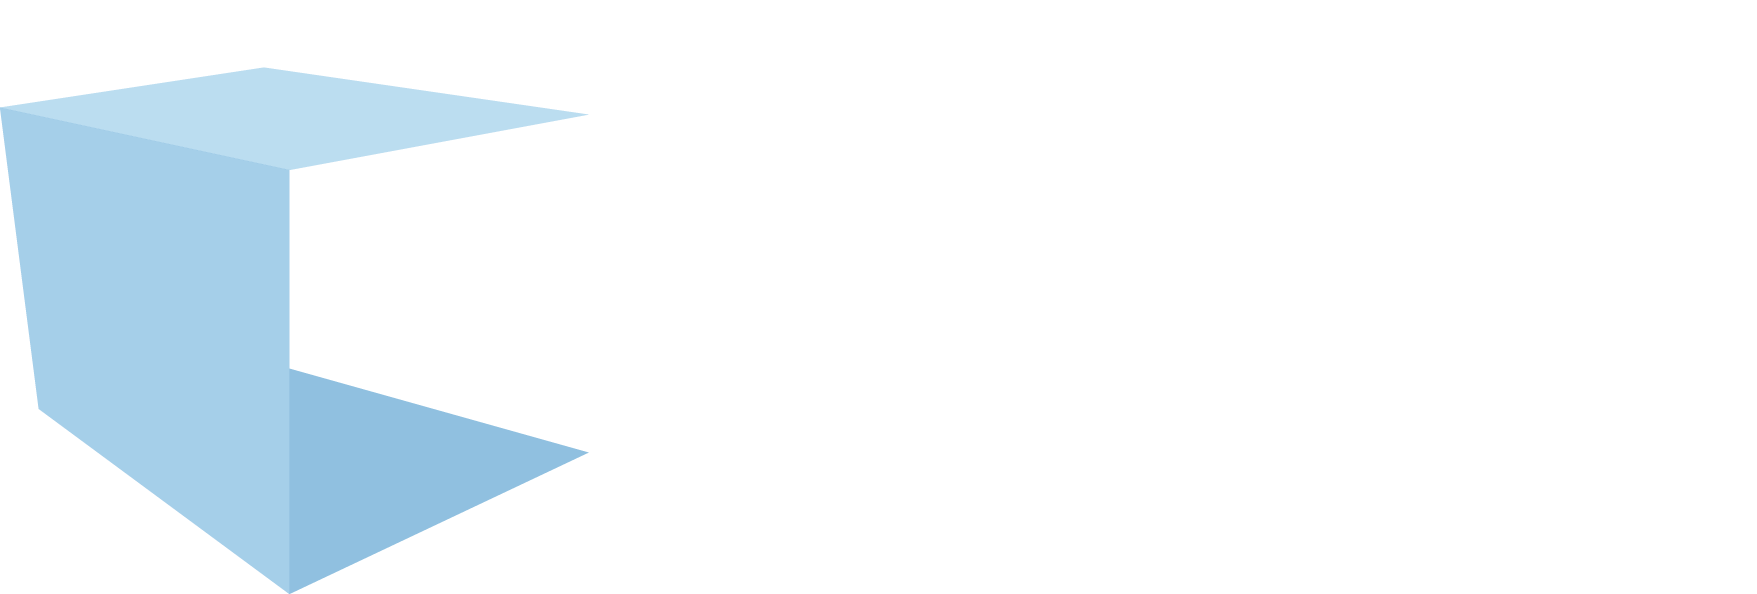 Moralbox – Know your workforce is compliant.